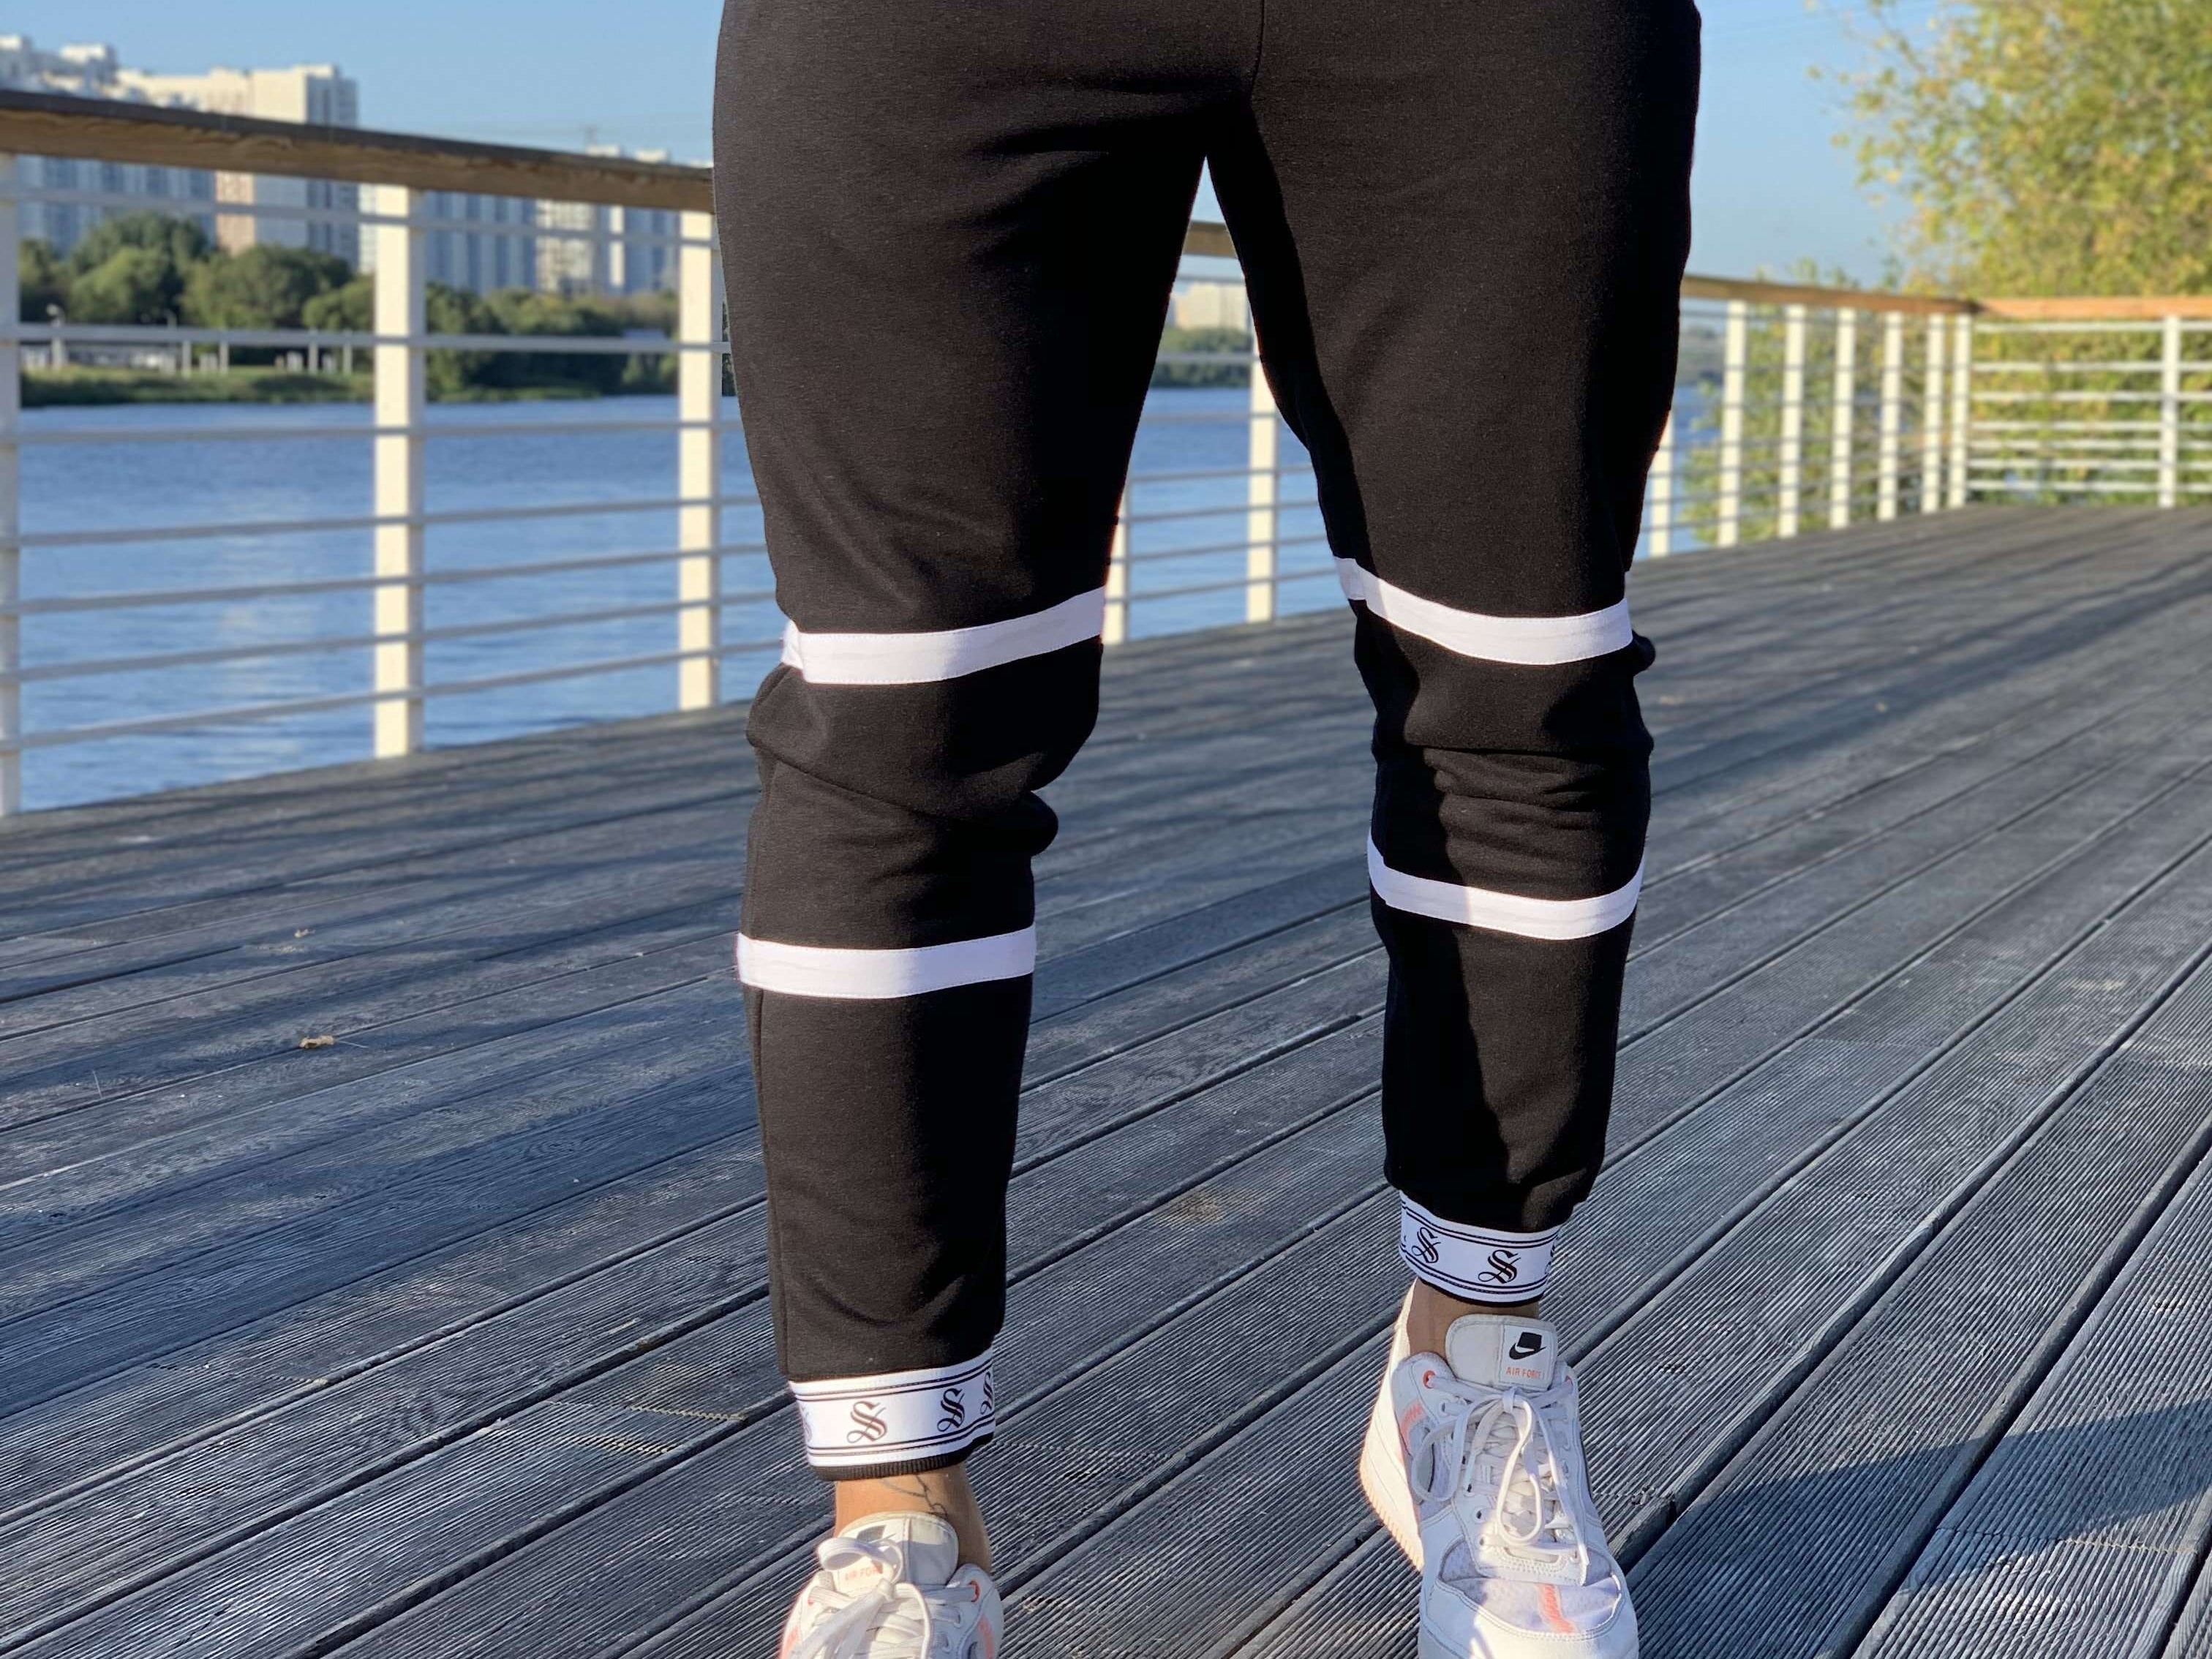 Time - Black/White Joggers for Men (PRE-ORDER DISPATCH DATE 1 JUIN 2021) - Sarman Fashion - Wholesale Clothing Fashion Brand for Men from Canada